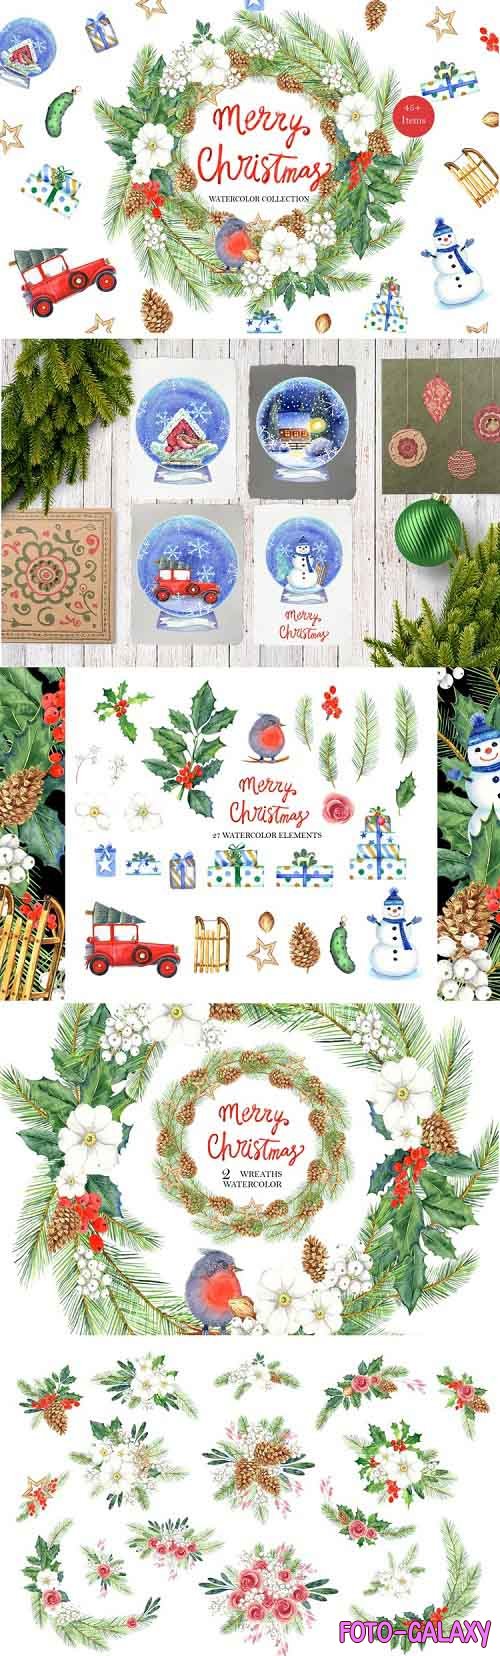 Merry Christmas watercolor collection - 1016722